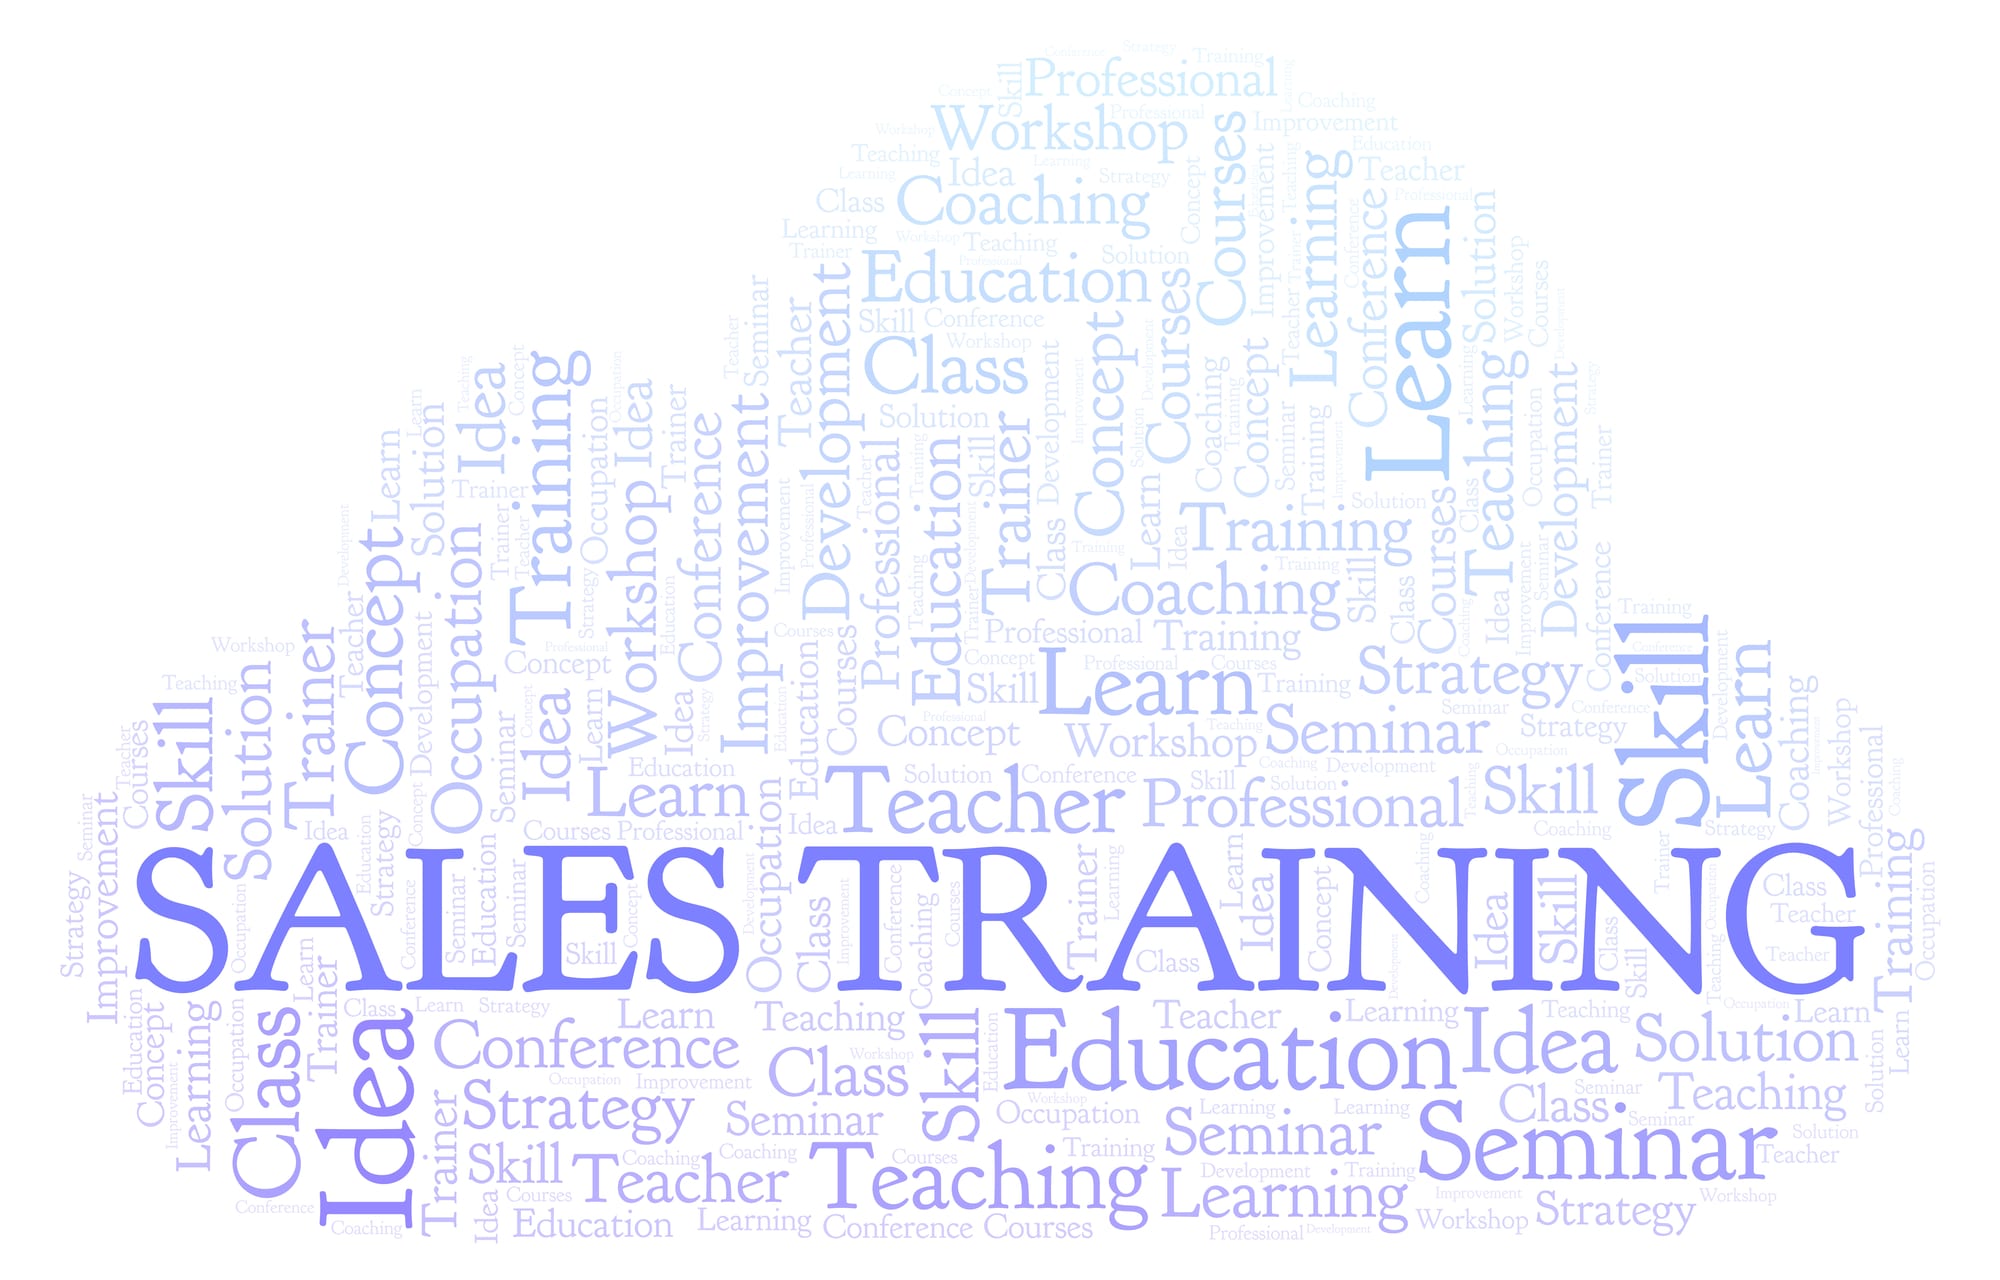 How to Tailor Sales Training Methods Using Sales Personality Tests